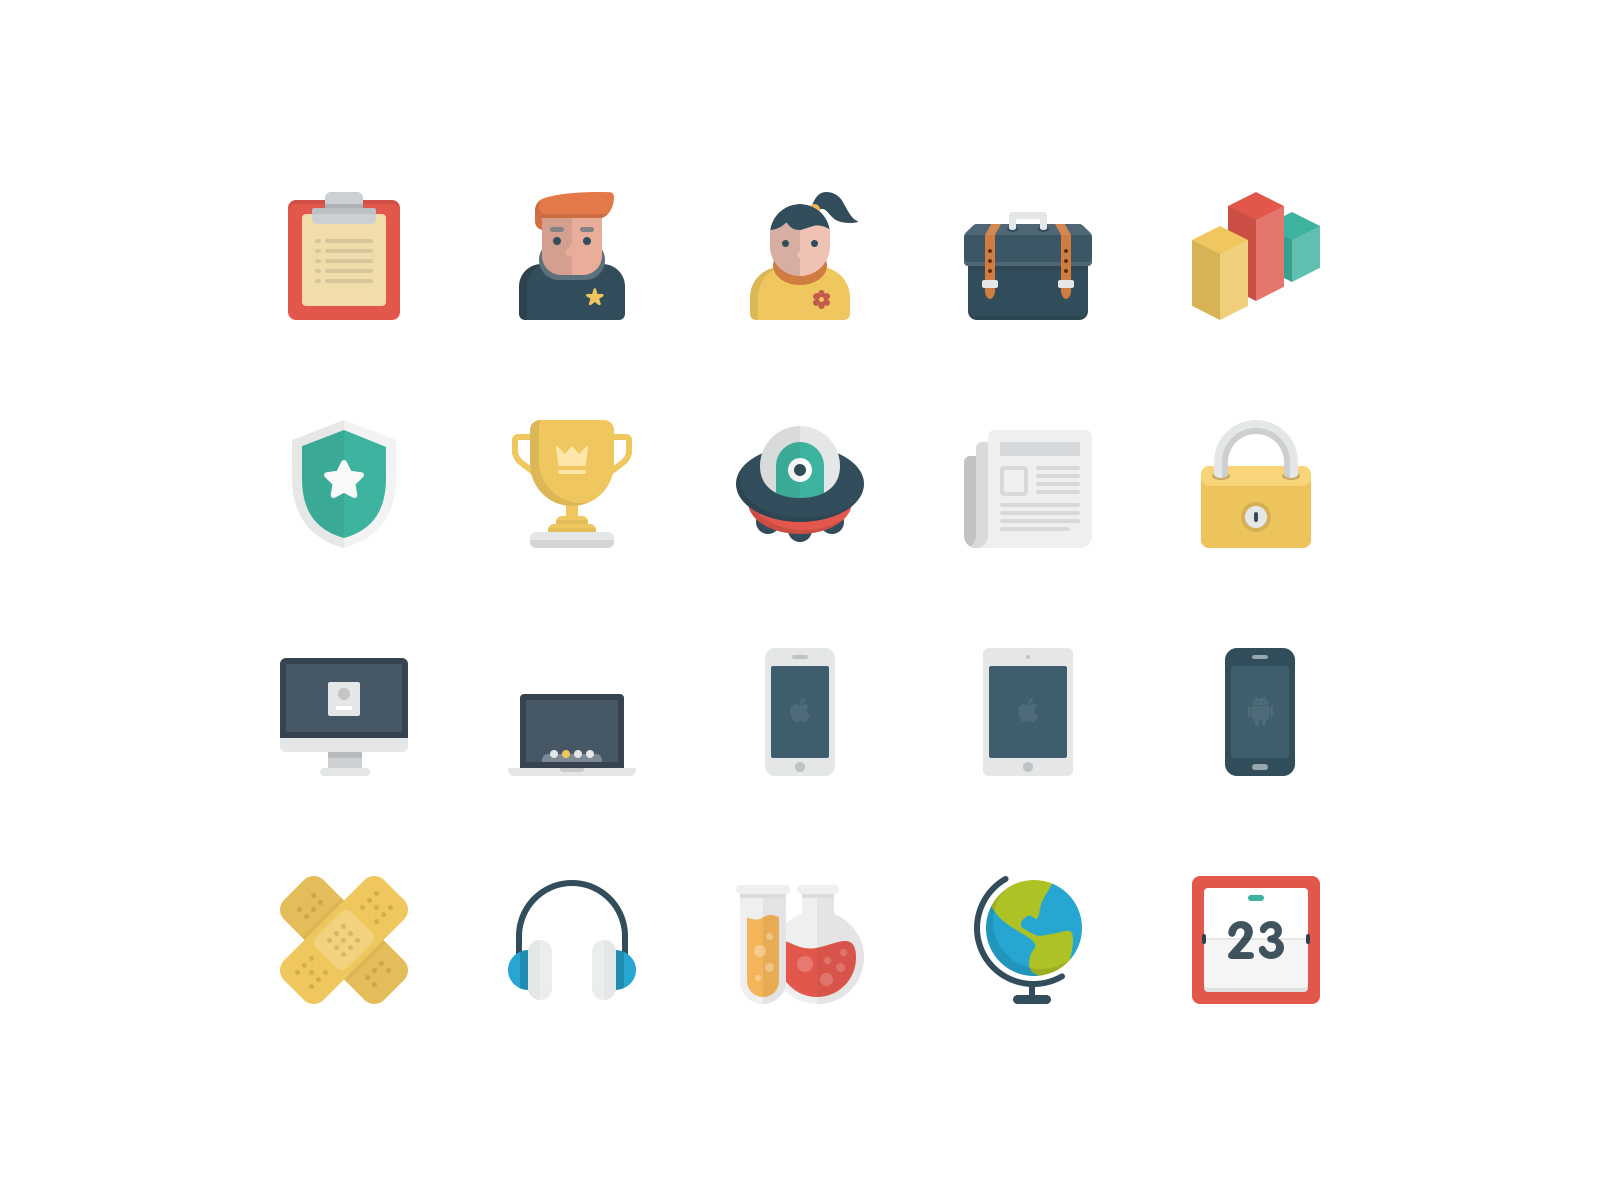 BasicBasic Flat Icons Set #2 100x100 business colorful download flat flat design game icons icons pack icons set vector web